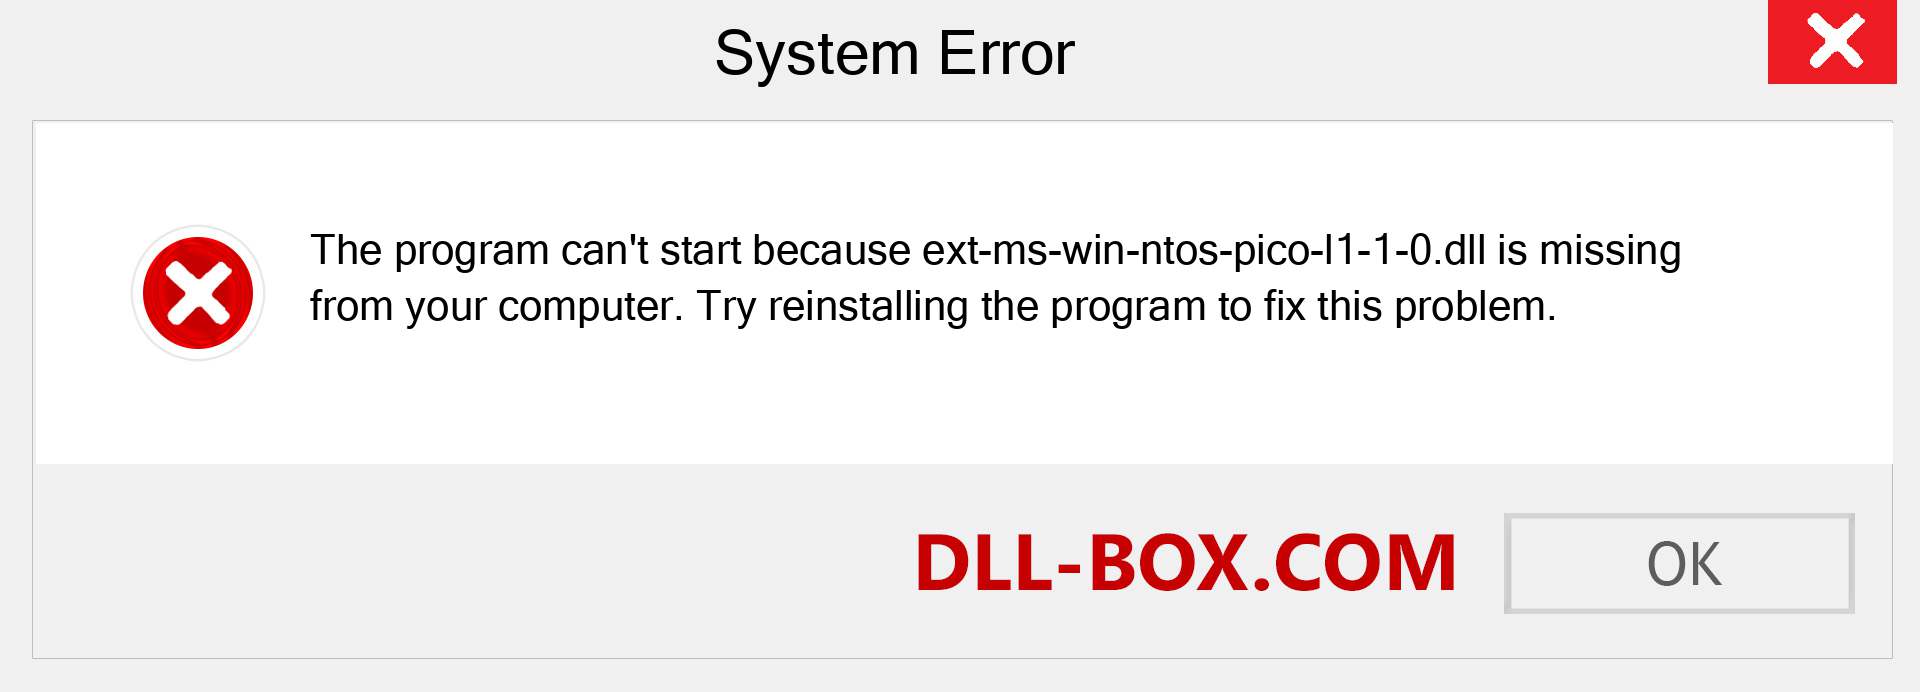  ext-ms-win-ntos-pico-l1-1-0.dll file is missing?. Download for Windows 7, 8, 10 - Fix  ext-ms-win-ntos-pico-l1-1-0 dll Missing Error on Windows, photos, images